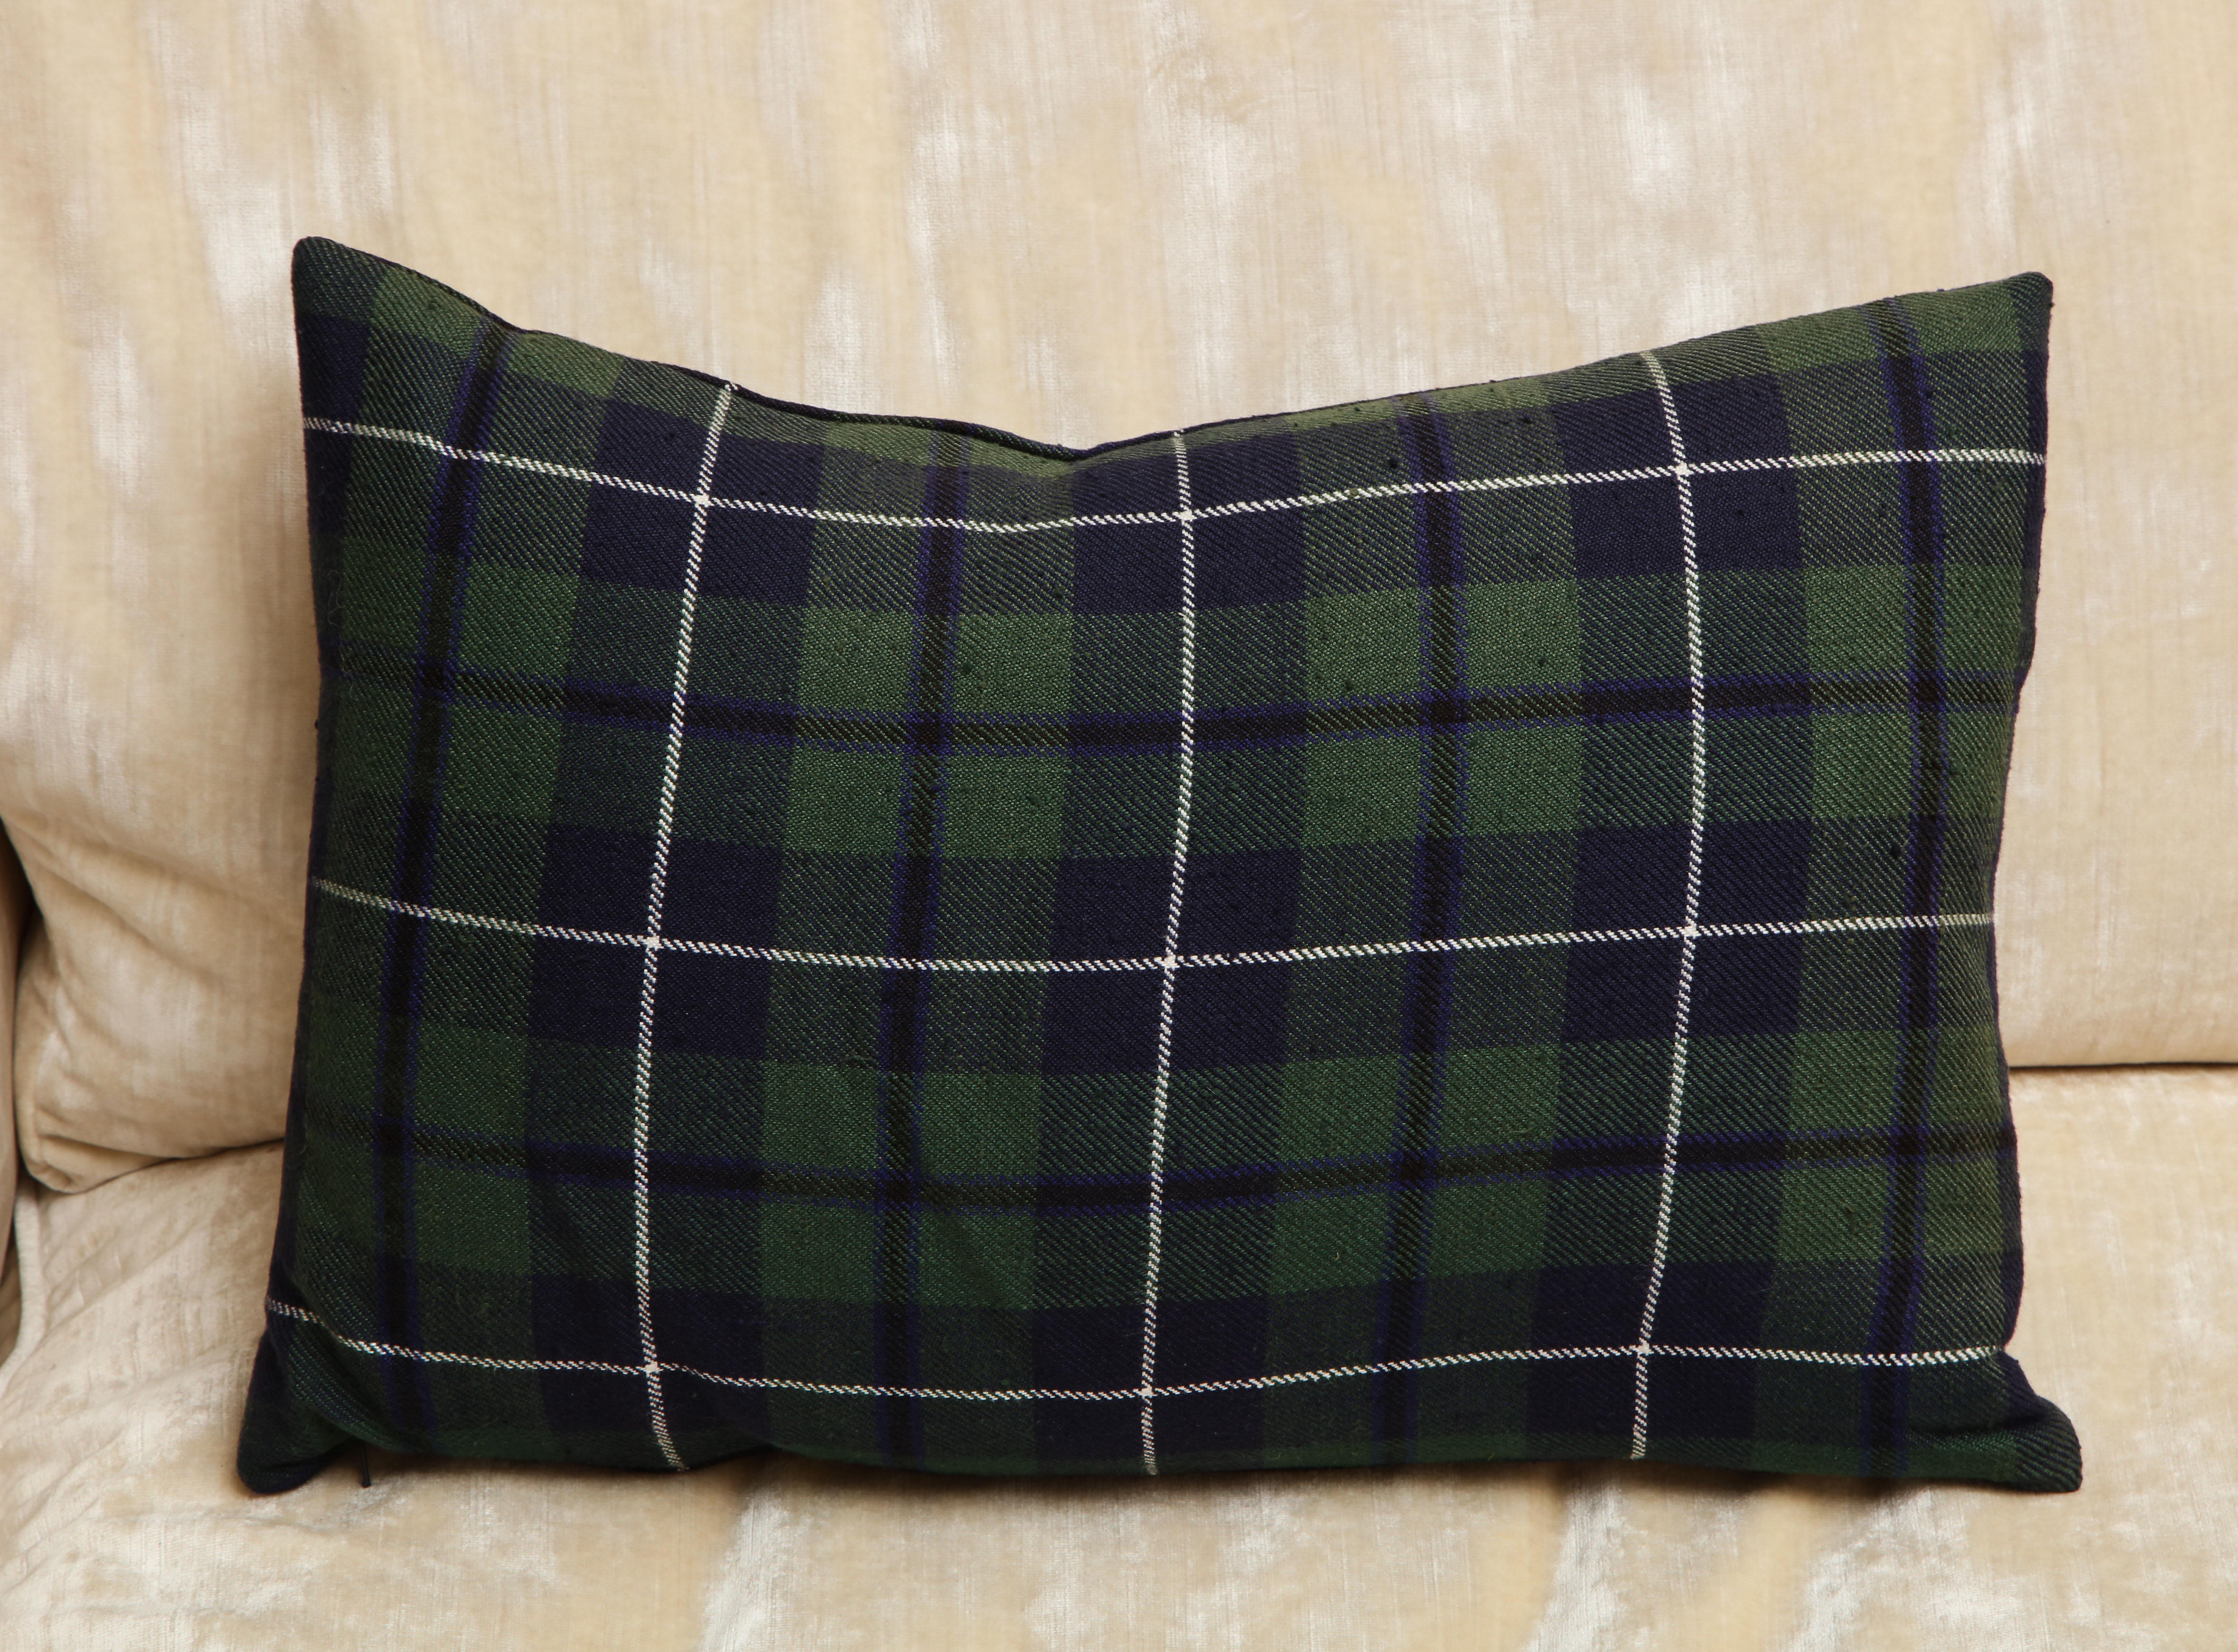 Contemporary Tartan Pillows Associated to Clan Urquhart from Scotland For Sale